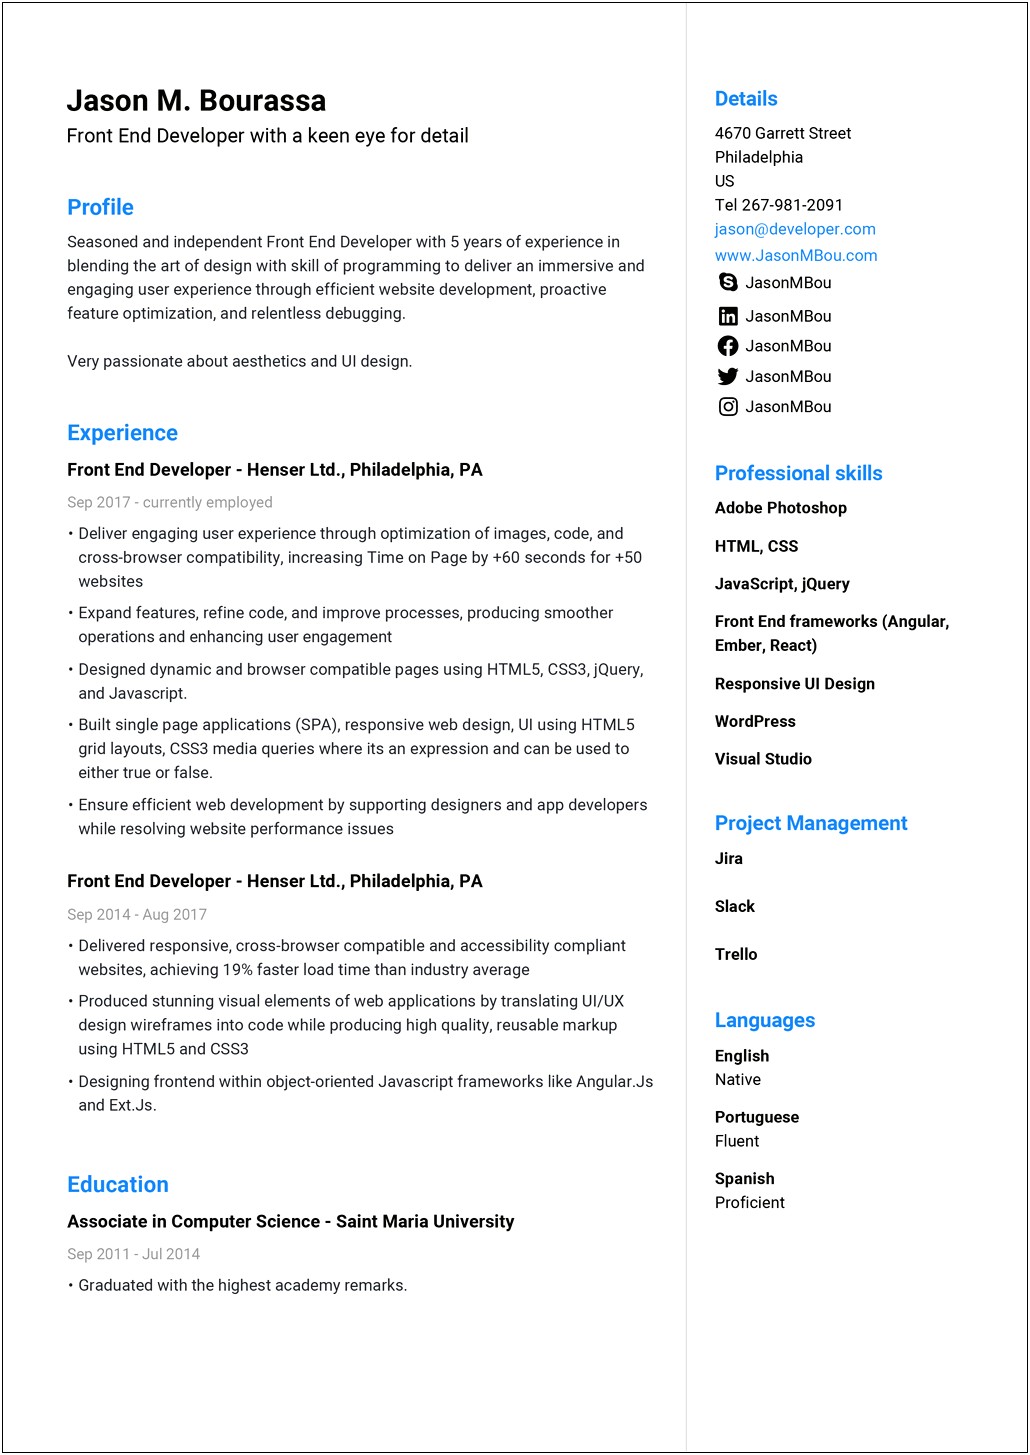 Input Infor Into Resume Free Online